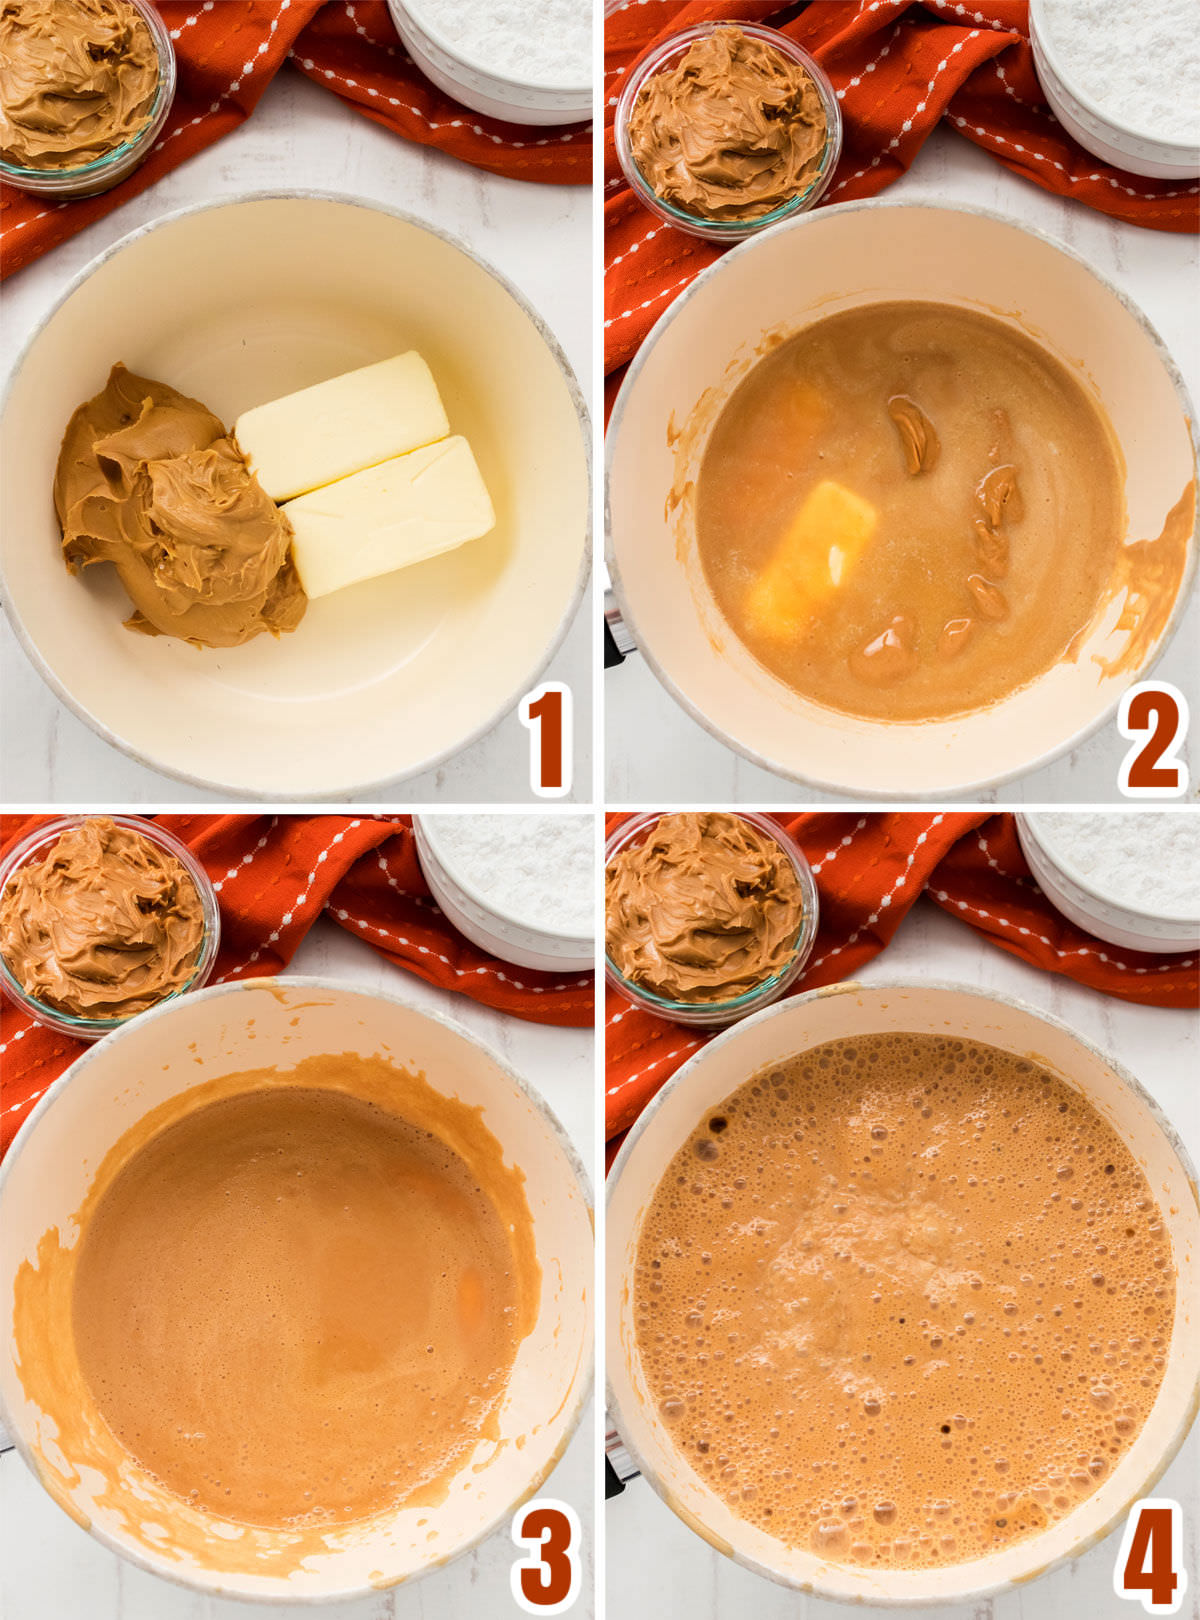 Collage image showing the steps for making the Easy Peanut Butter Fudge recipe.